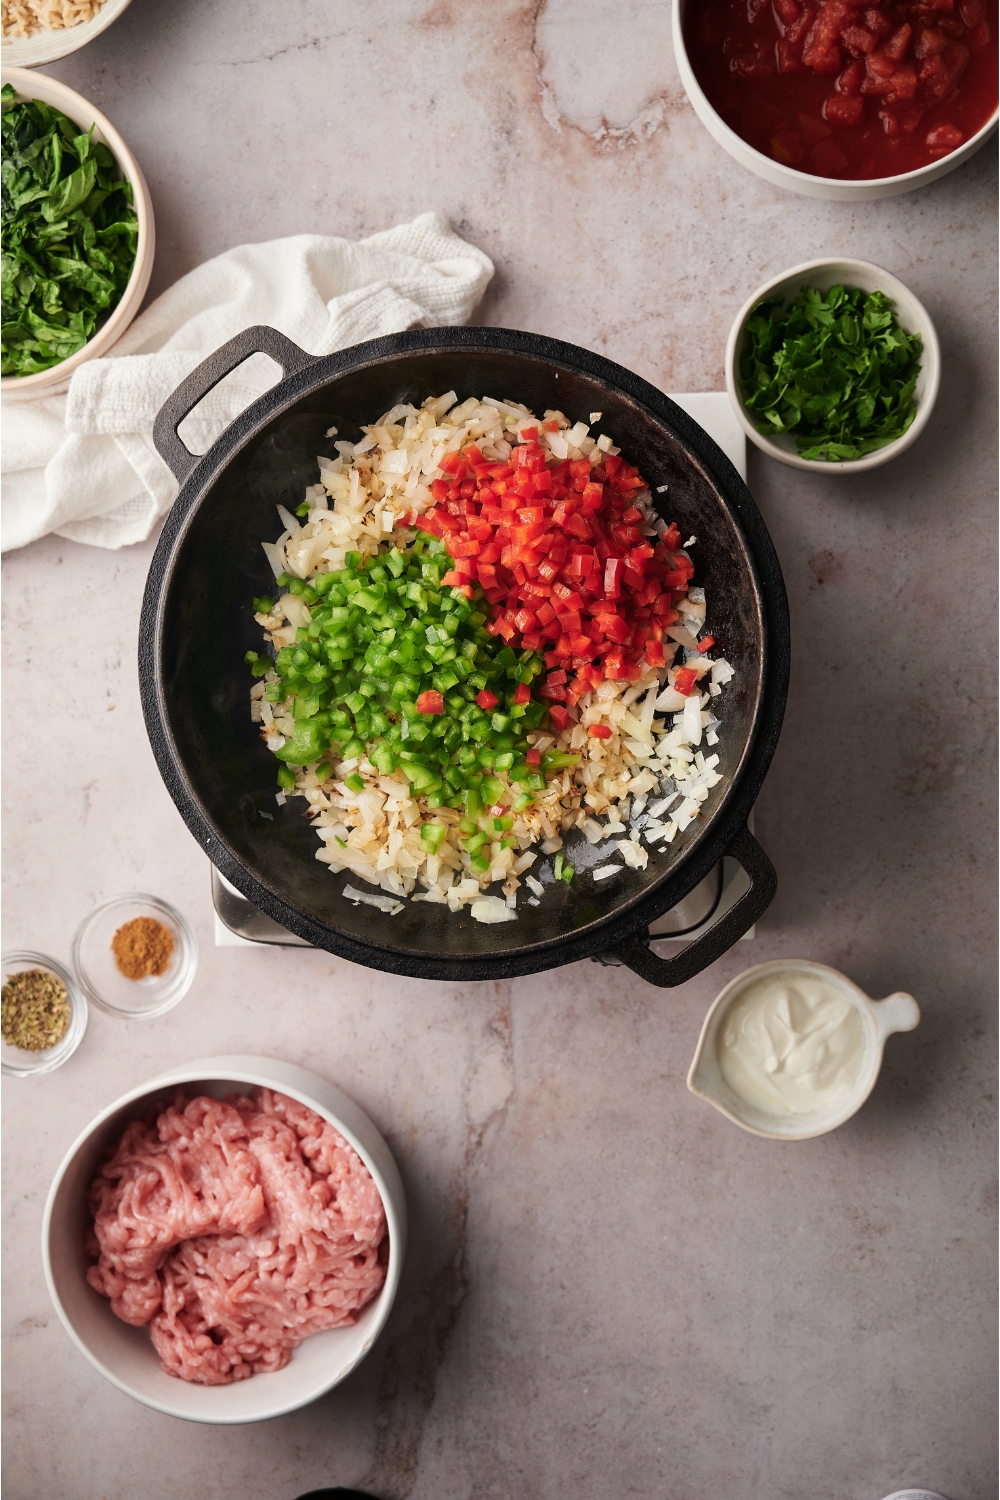 Black skillet with diced onion, diced green peppers, and diced red peppers. The skillet is surrounded by ingredients including bowls of raw turkey, sour cream, parsley, and seasonings.